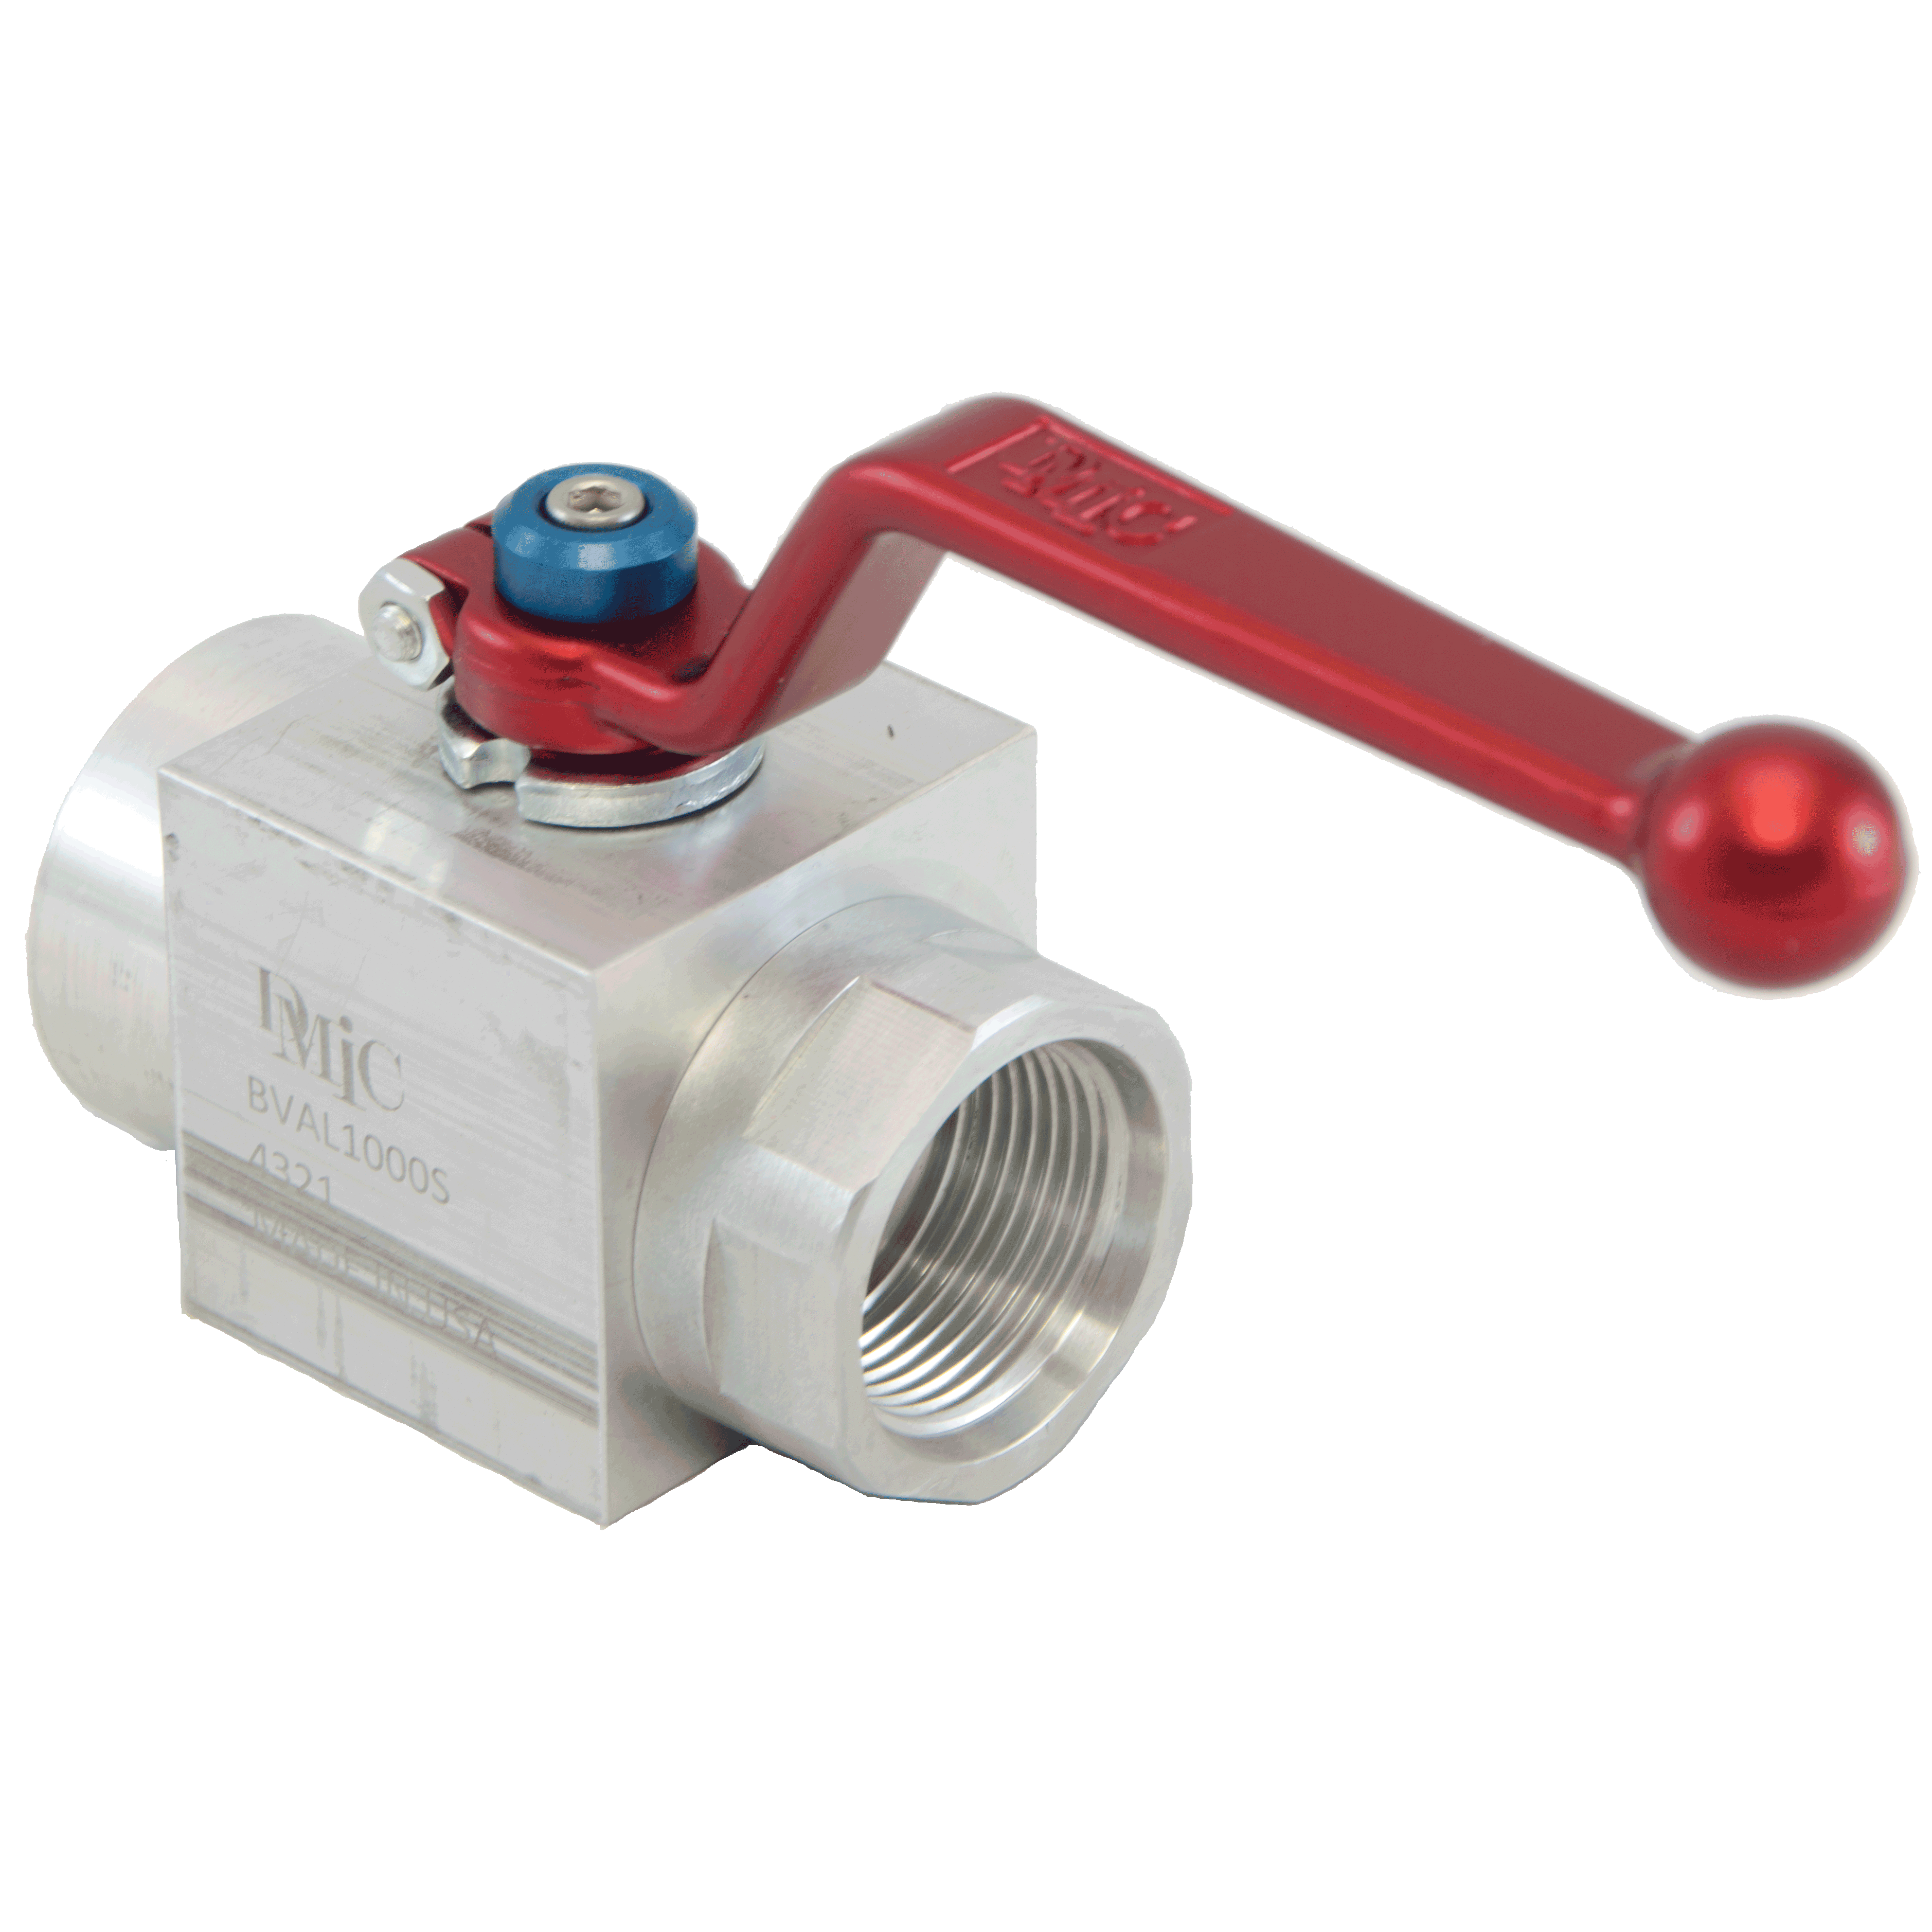 BVAL-0500N-4321 : DMIC Suction Ball Valve, 1/2 NPT, Aluminum, 600psi, Two-Way